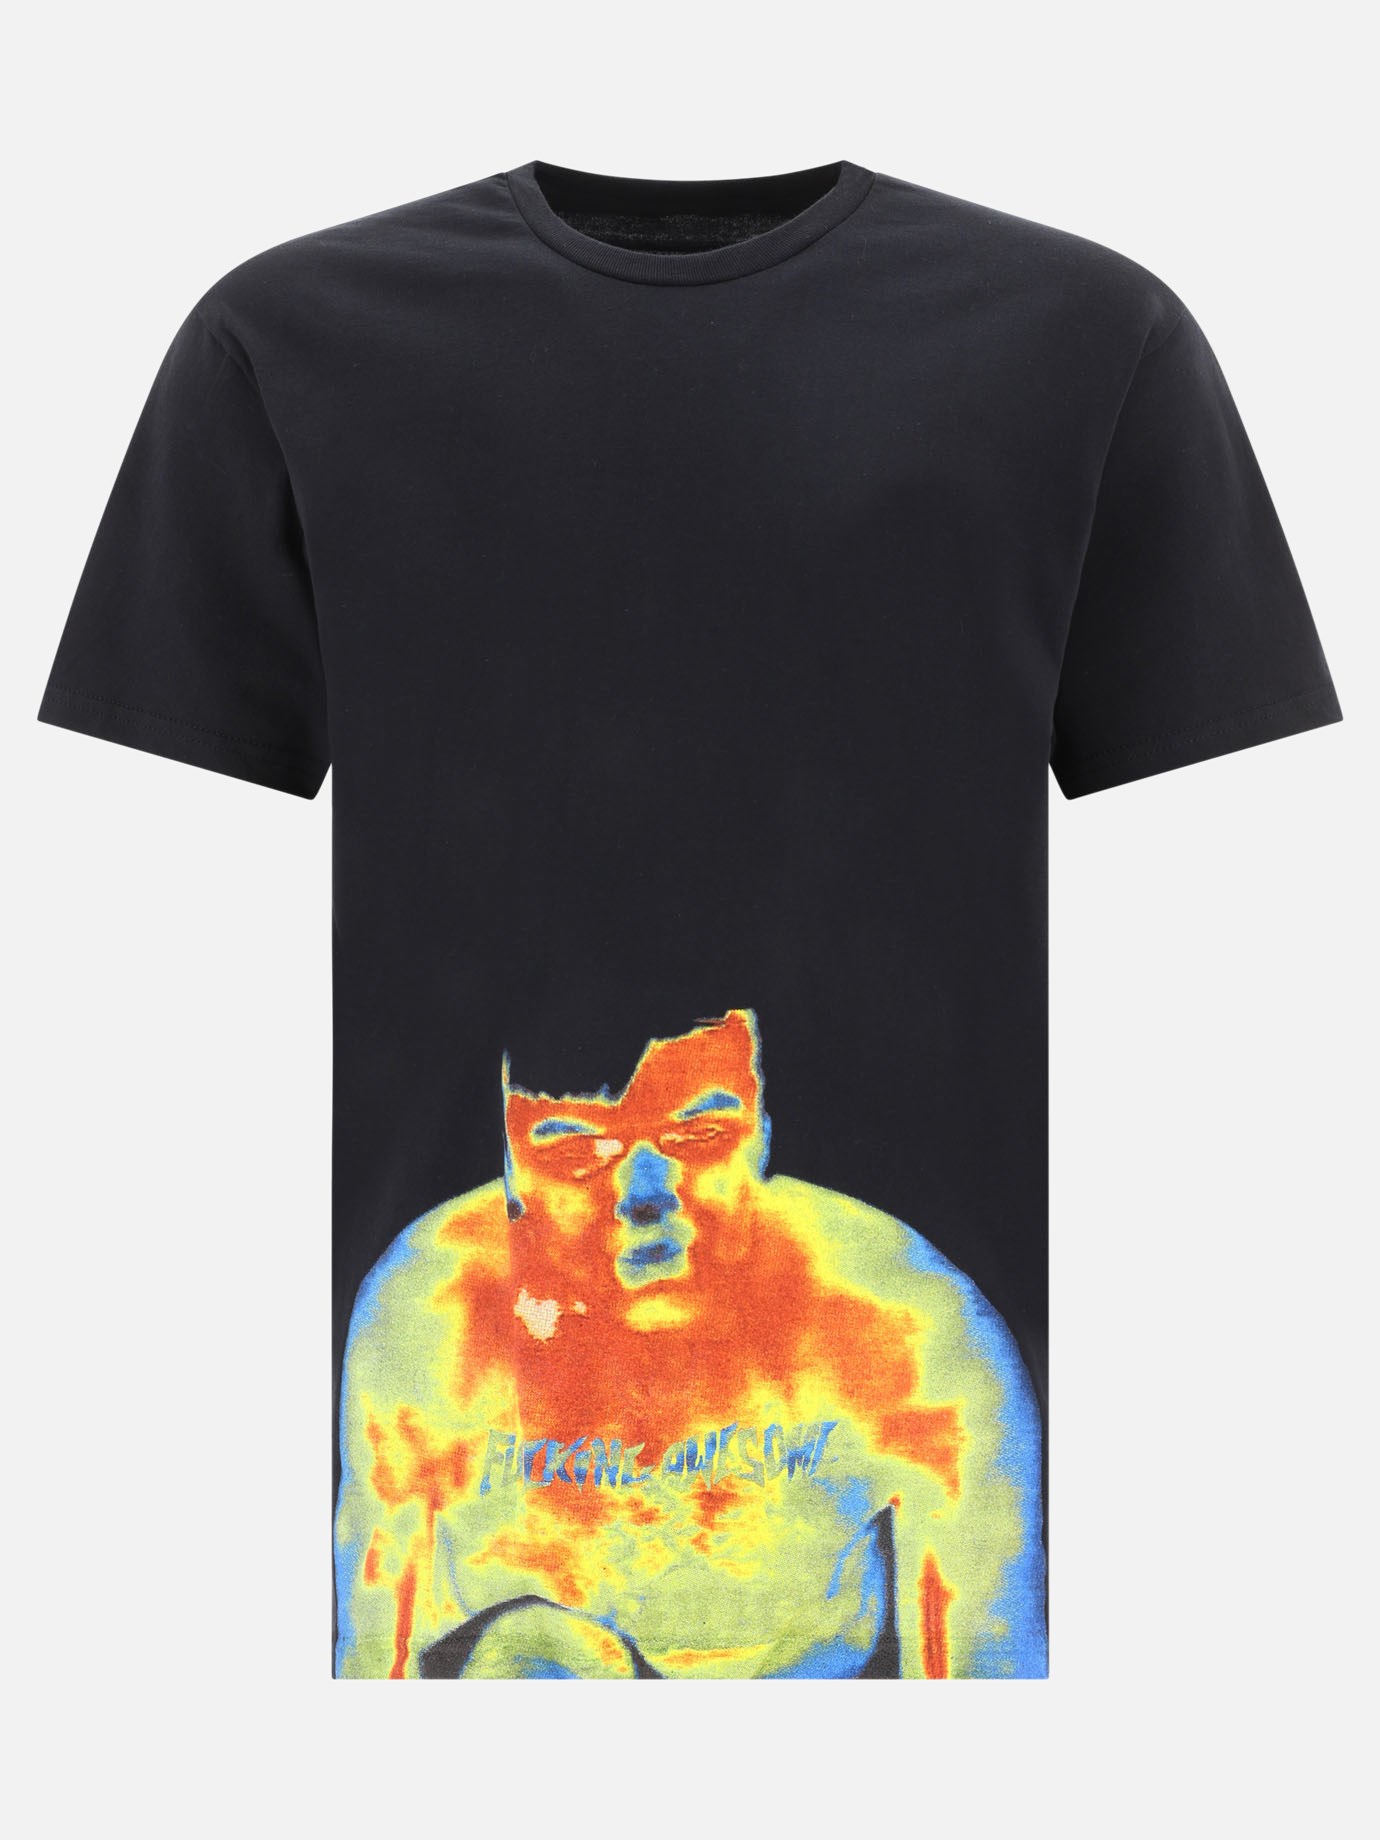  Thermal  t-shirtby Fucking Awesome - 5